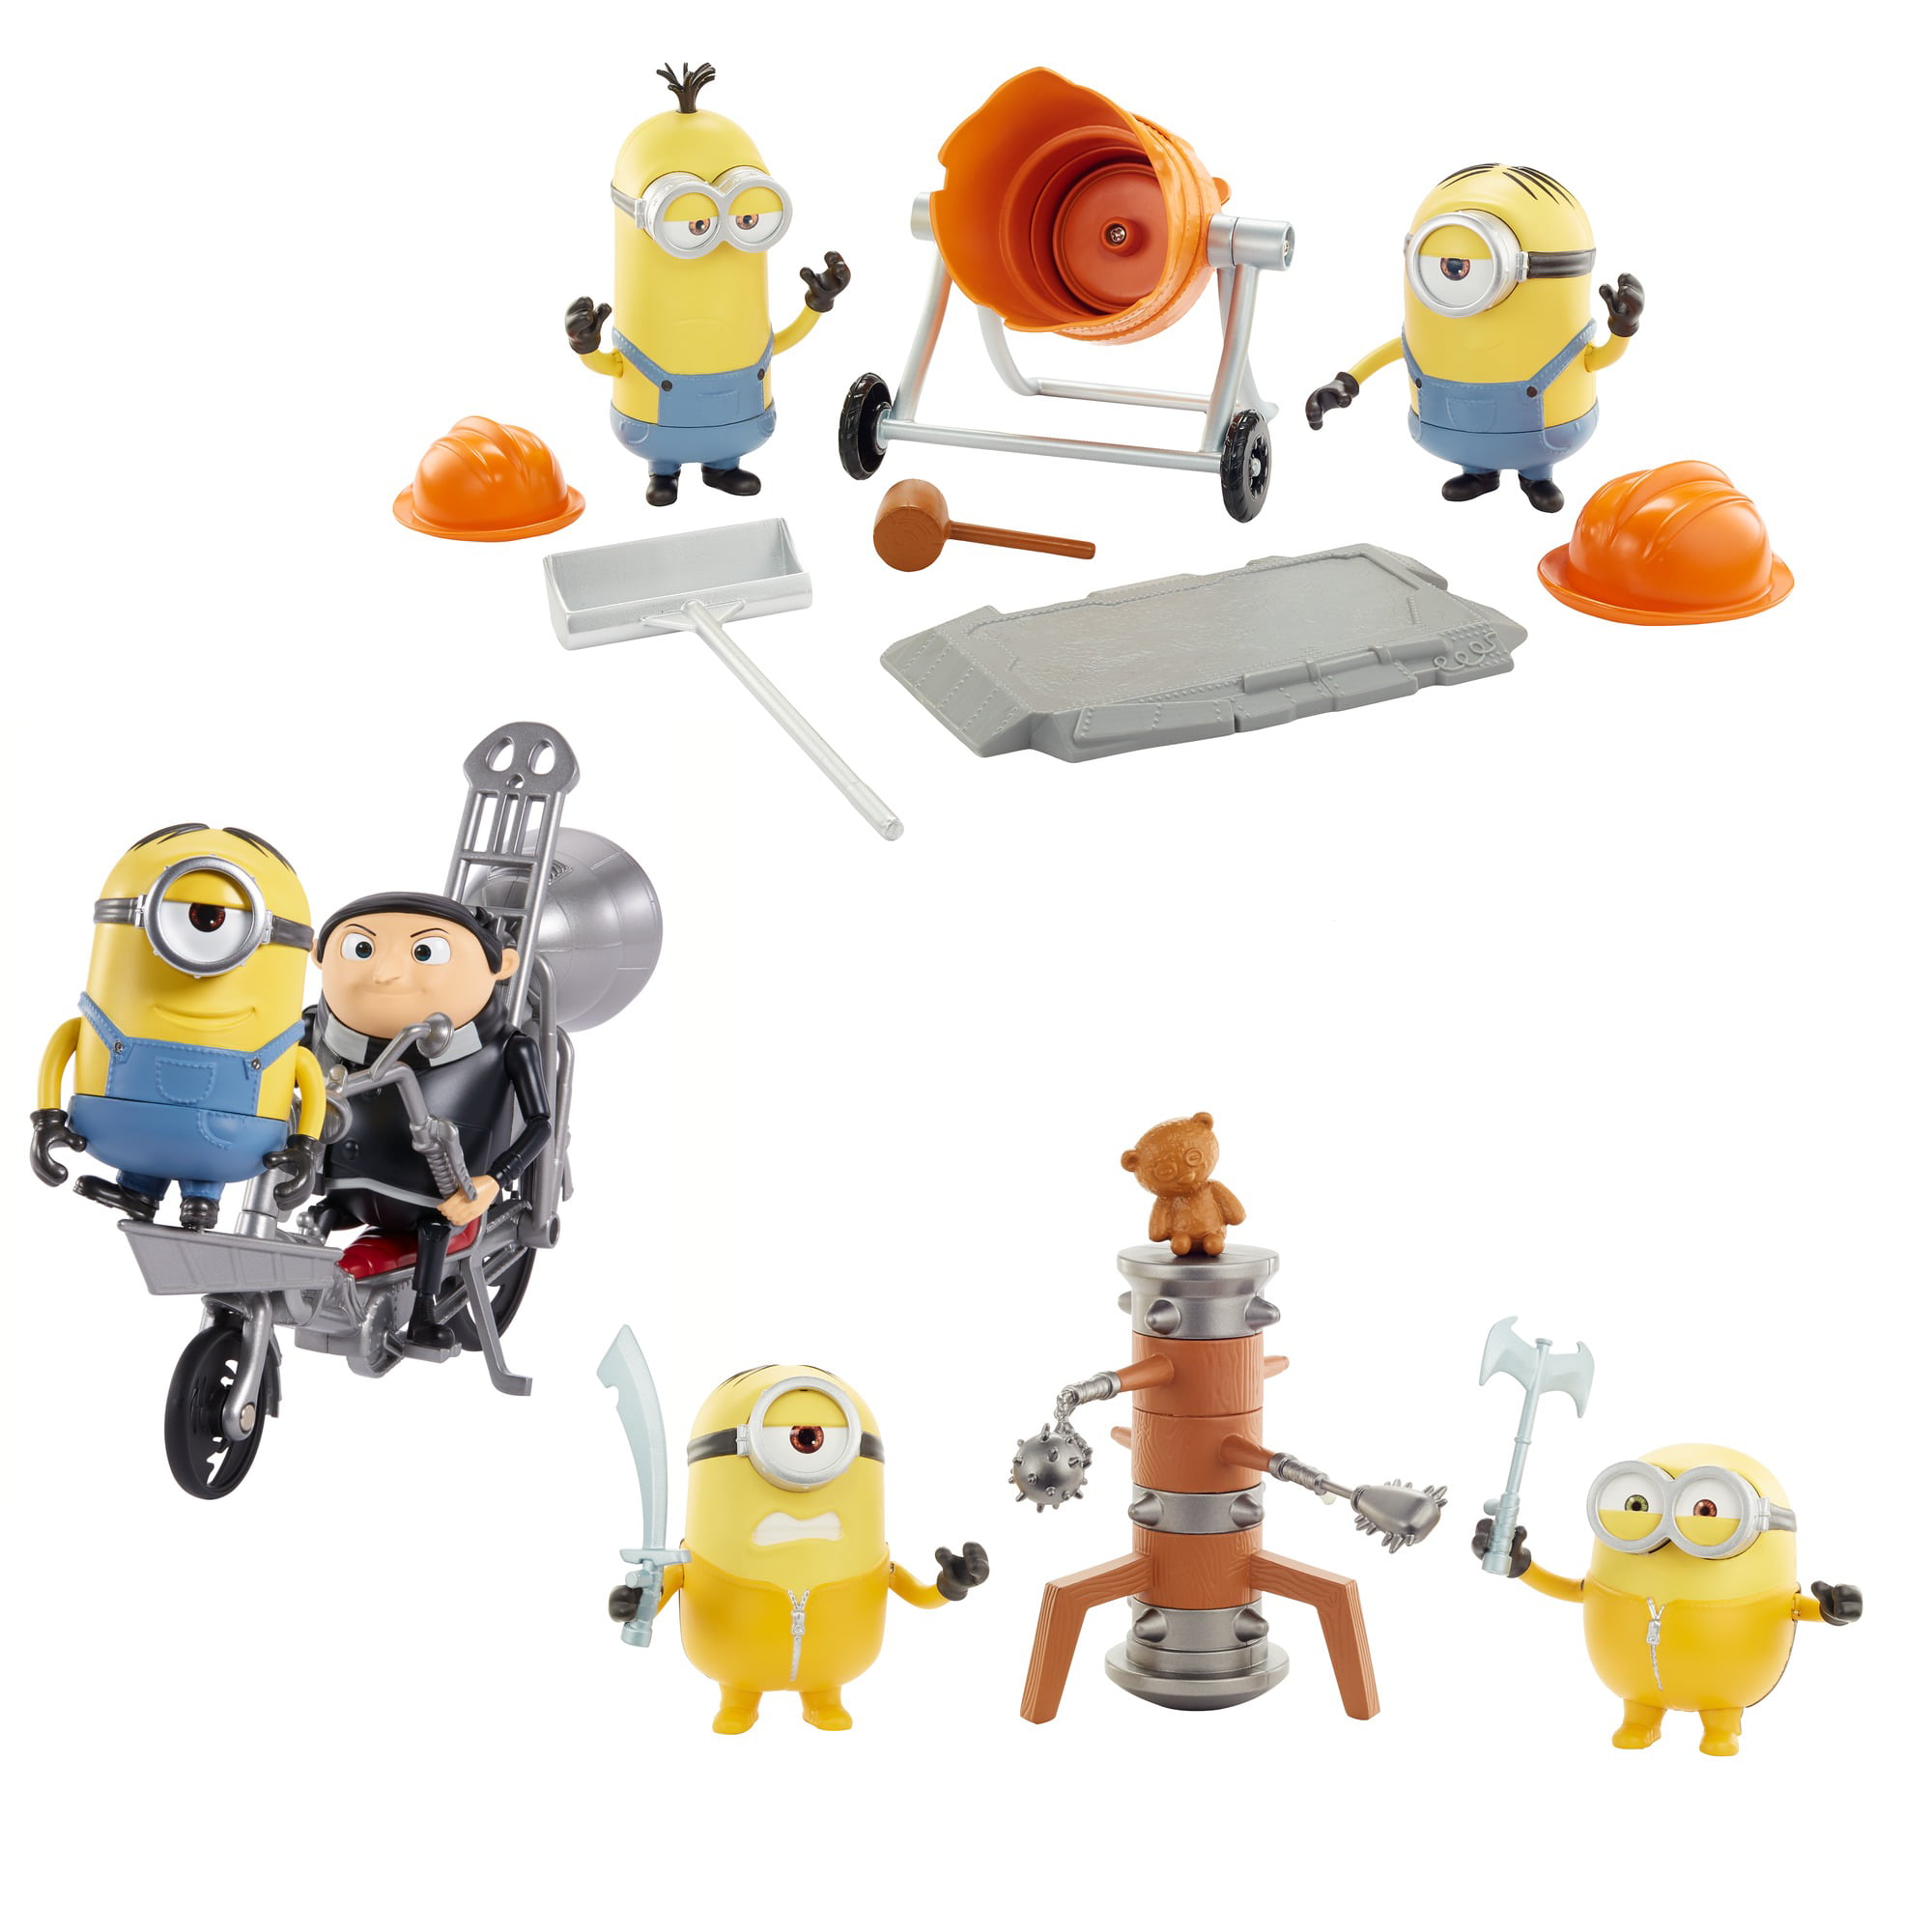 Despicable Me Minions The Rise of Gru Mini Figures Cake Toppers Toy Lot of 5 New